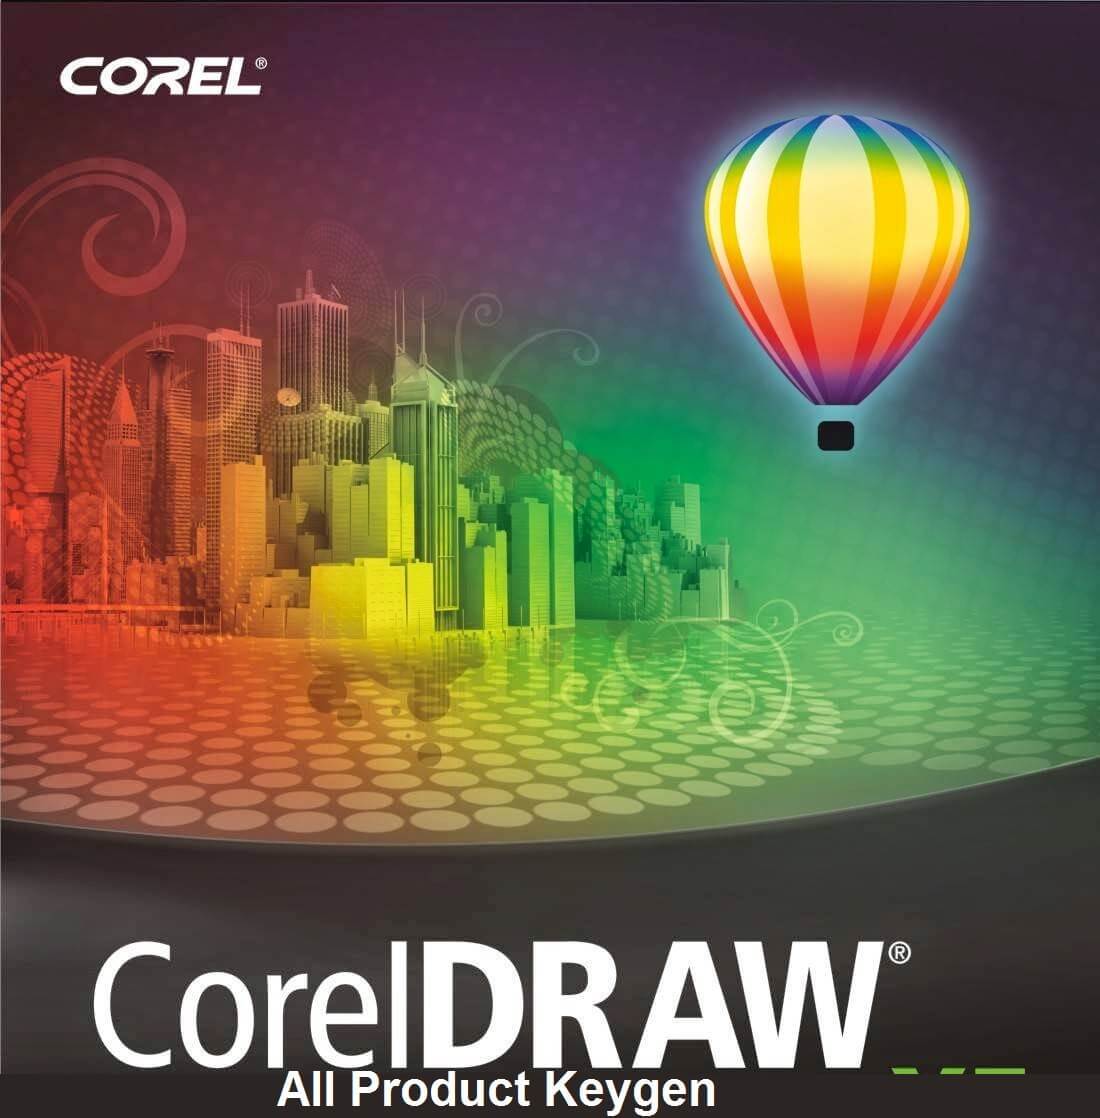 coreldraw free download full version with crack for windows 10